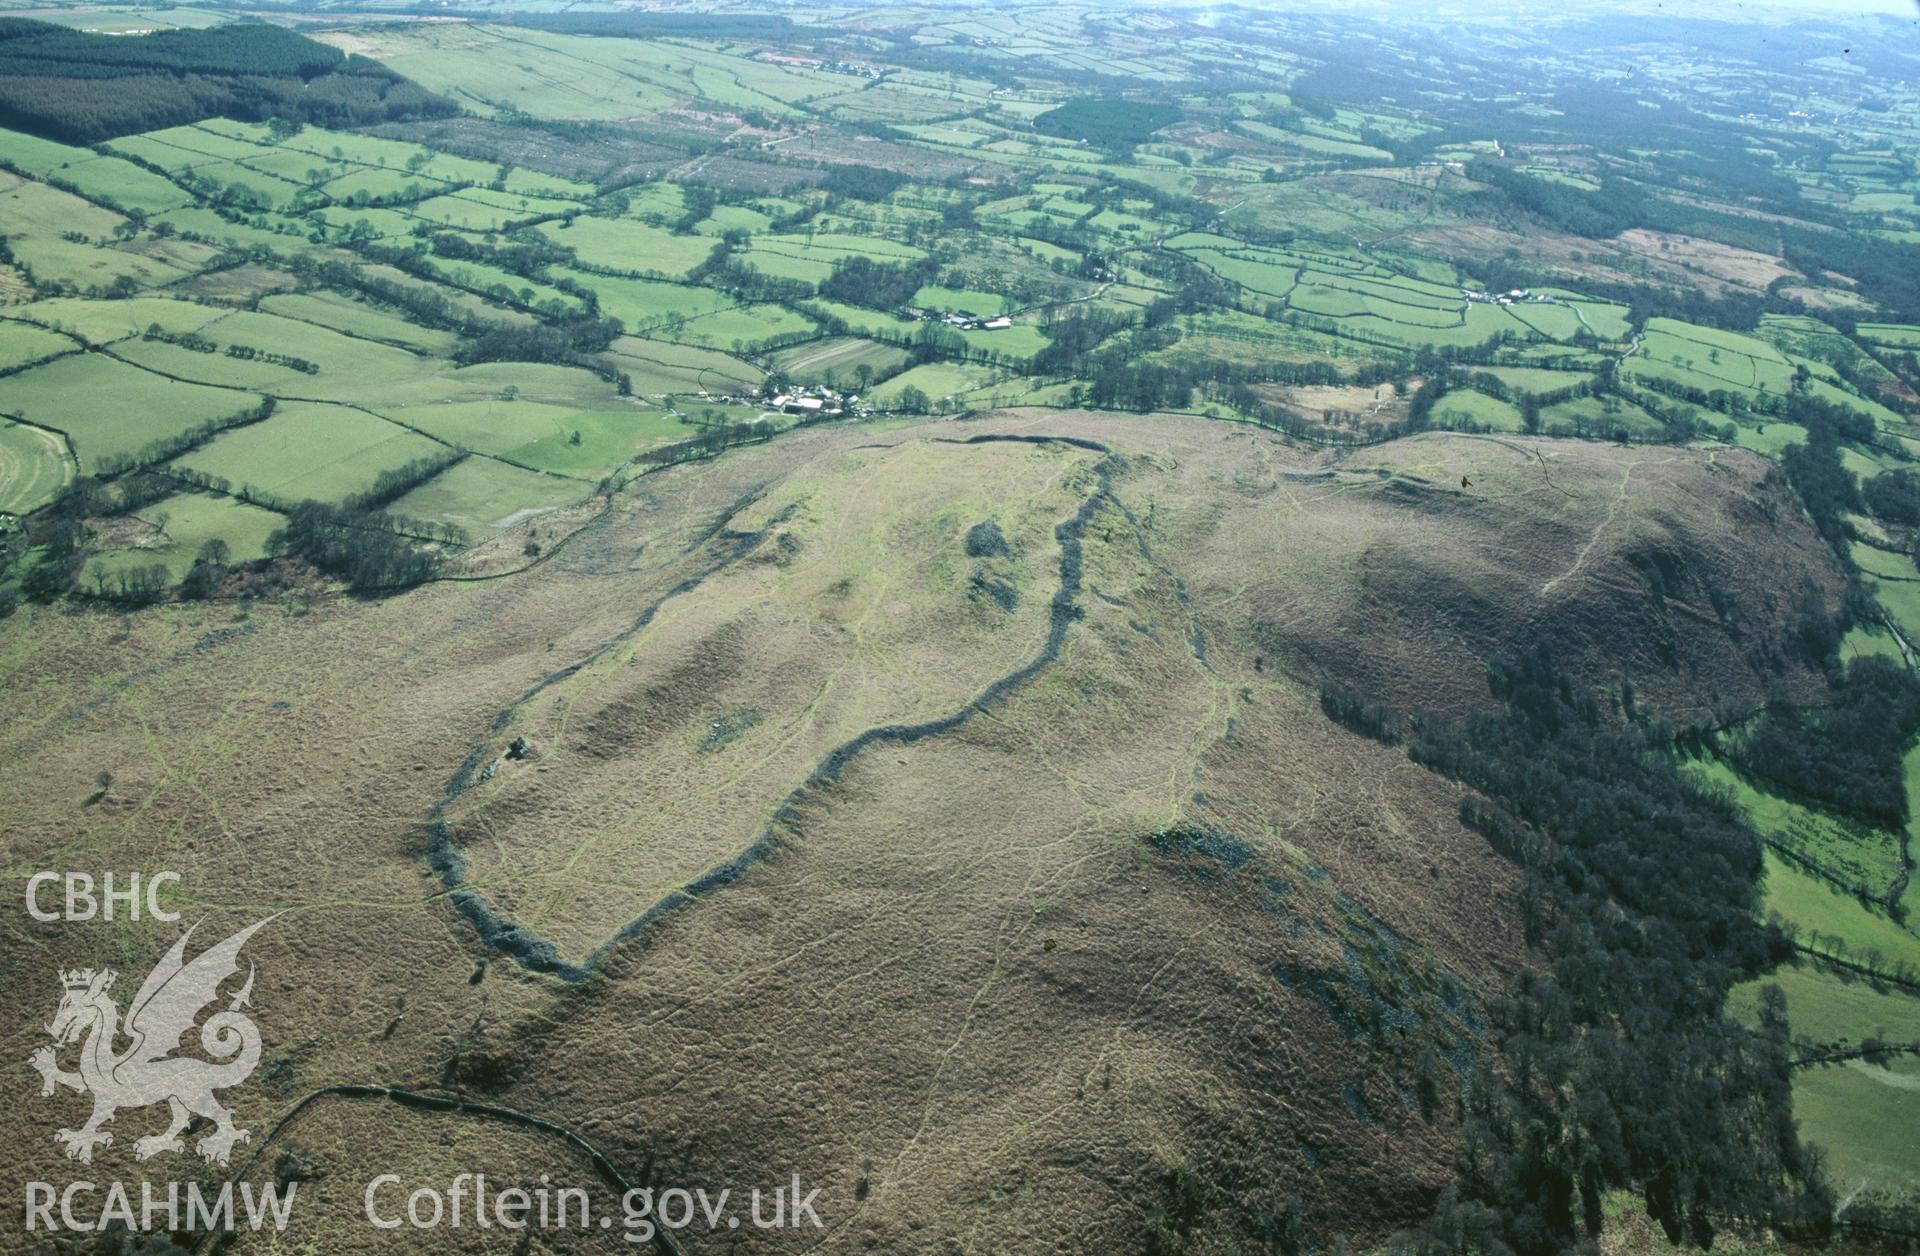 RCAHMW colour oblique aerial photograph of Gaer Fawr Hillfort on Y Garn Goch taken on 29/03/1995 by C.R. Musson